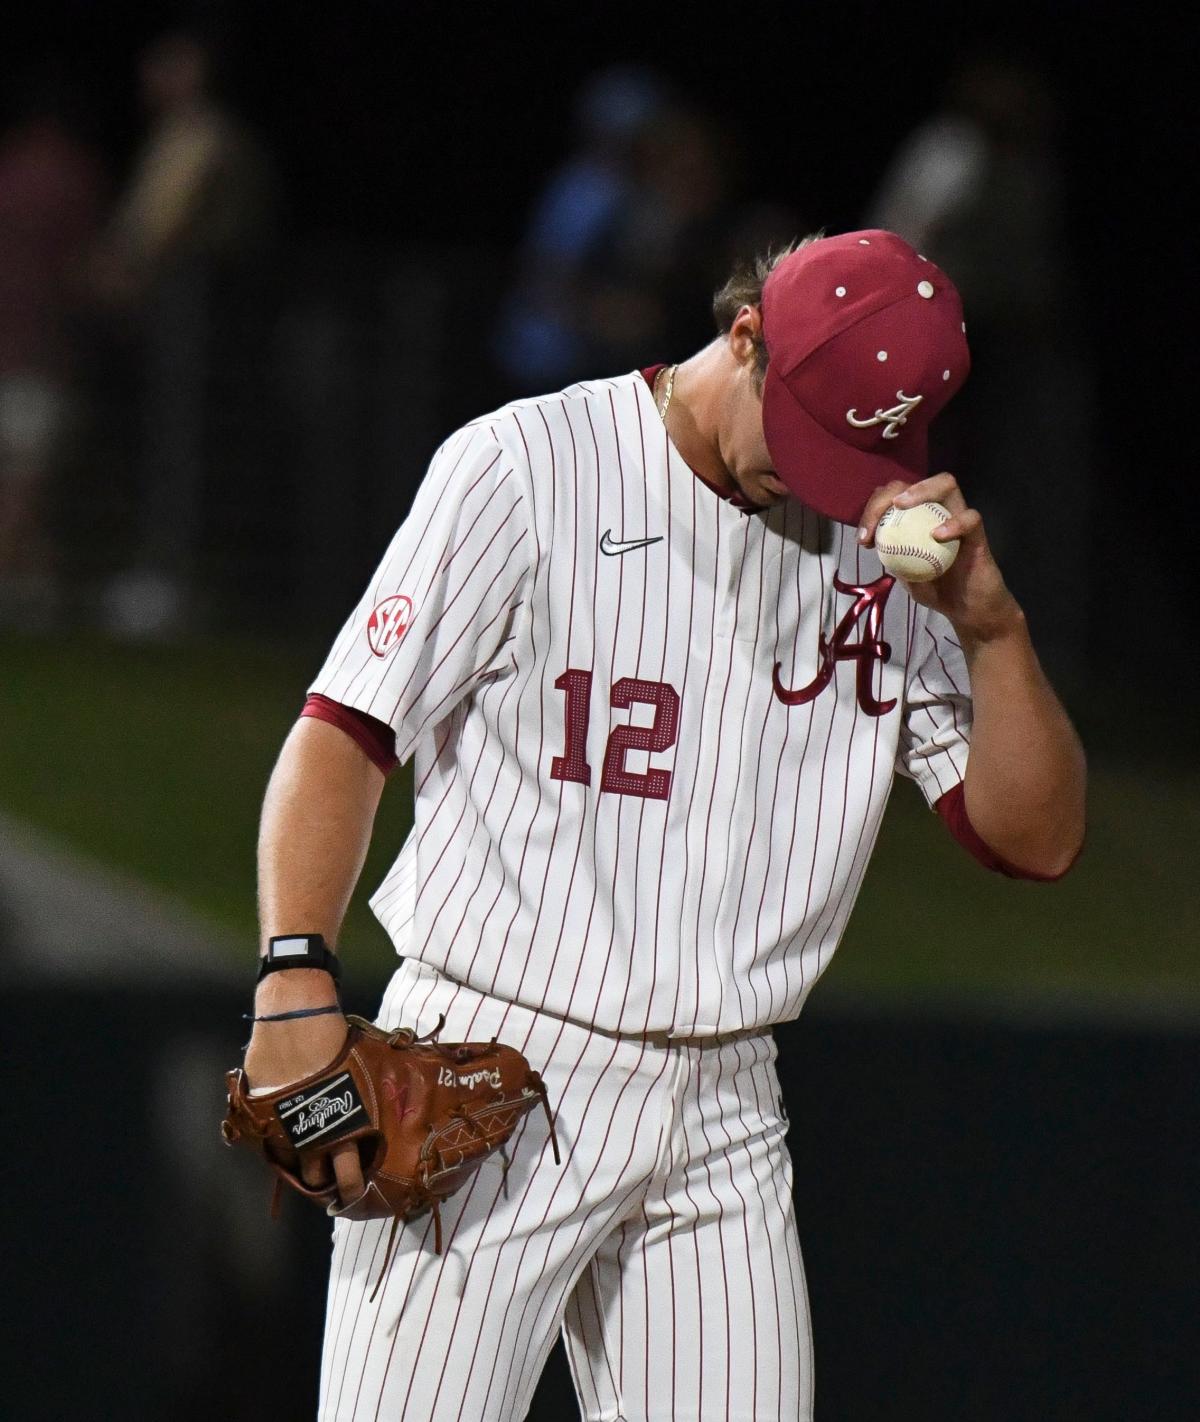 Alabama baseball is projected to make the NCAA Tournament. Where will